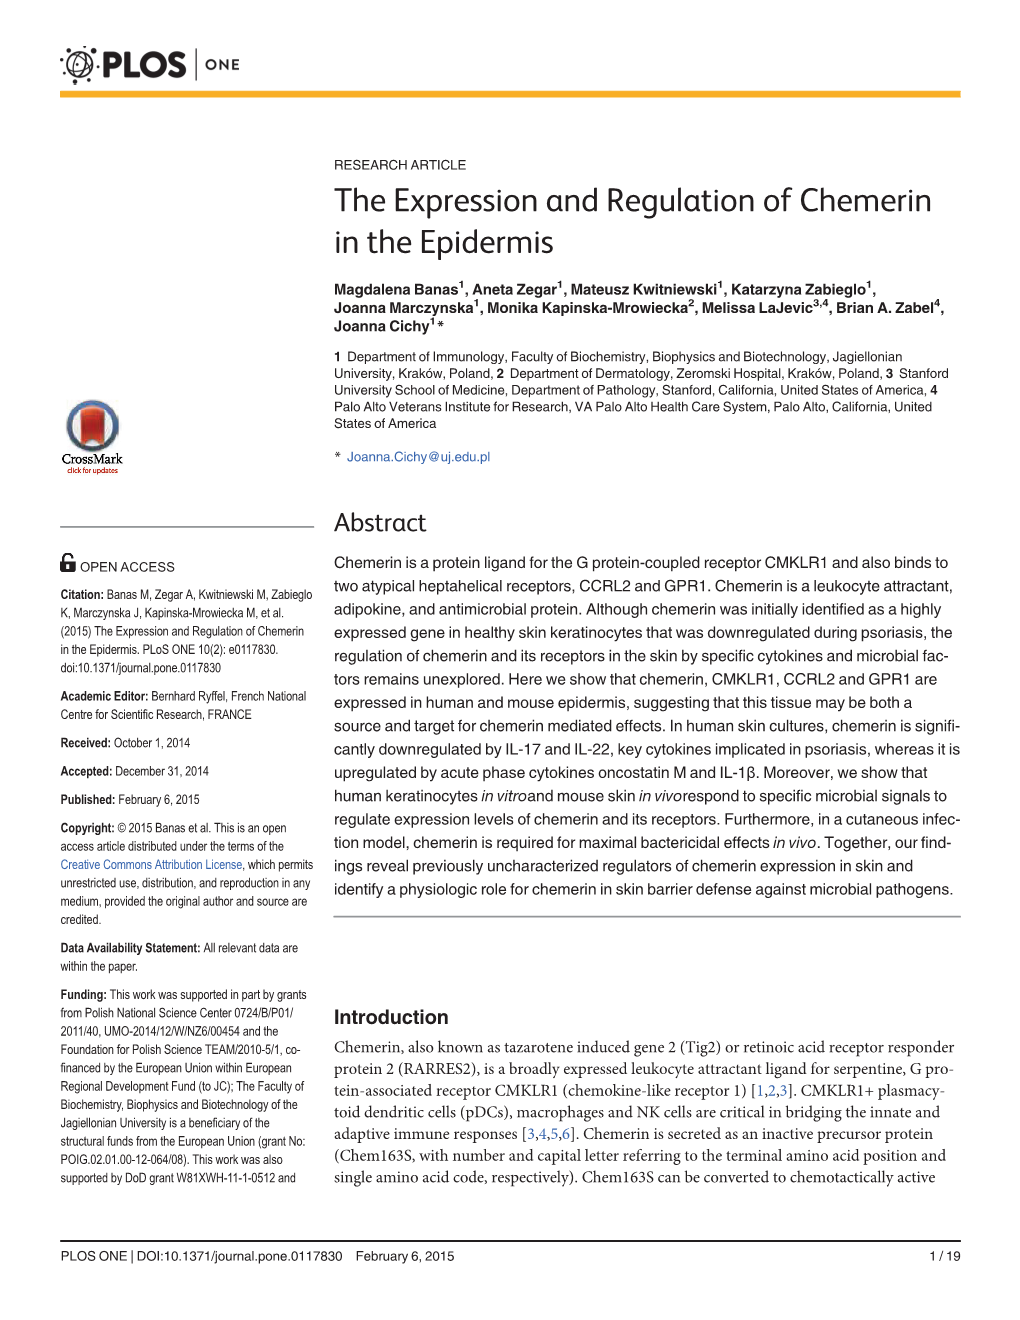 The Expression and Regulation of Chemerin in the Epidermis